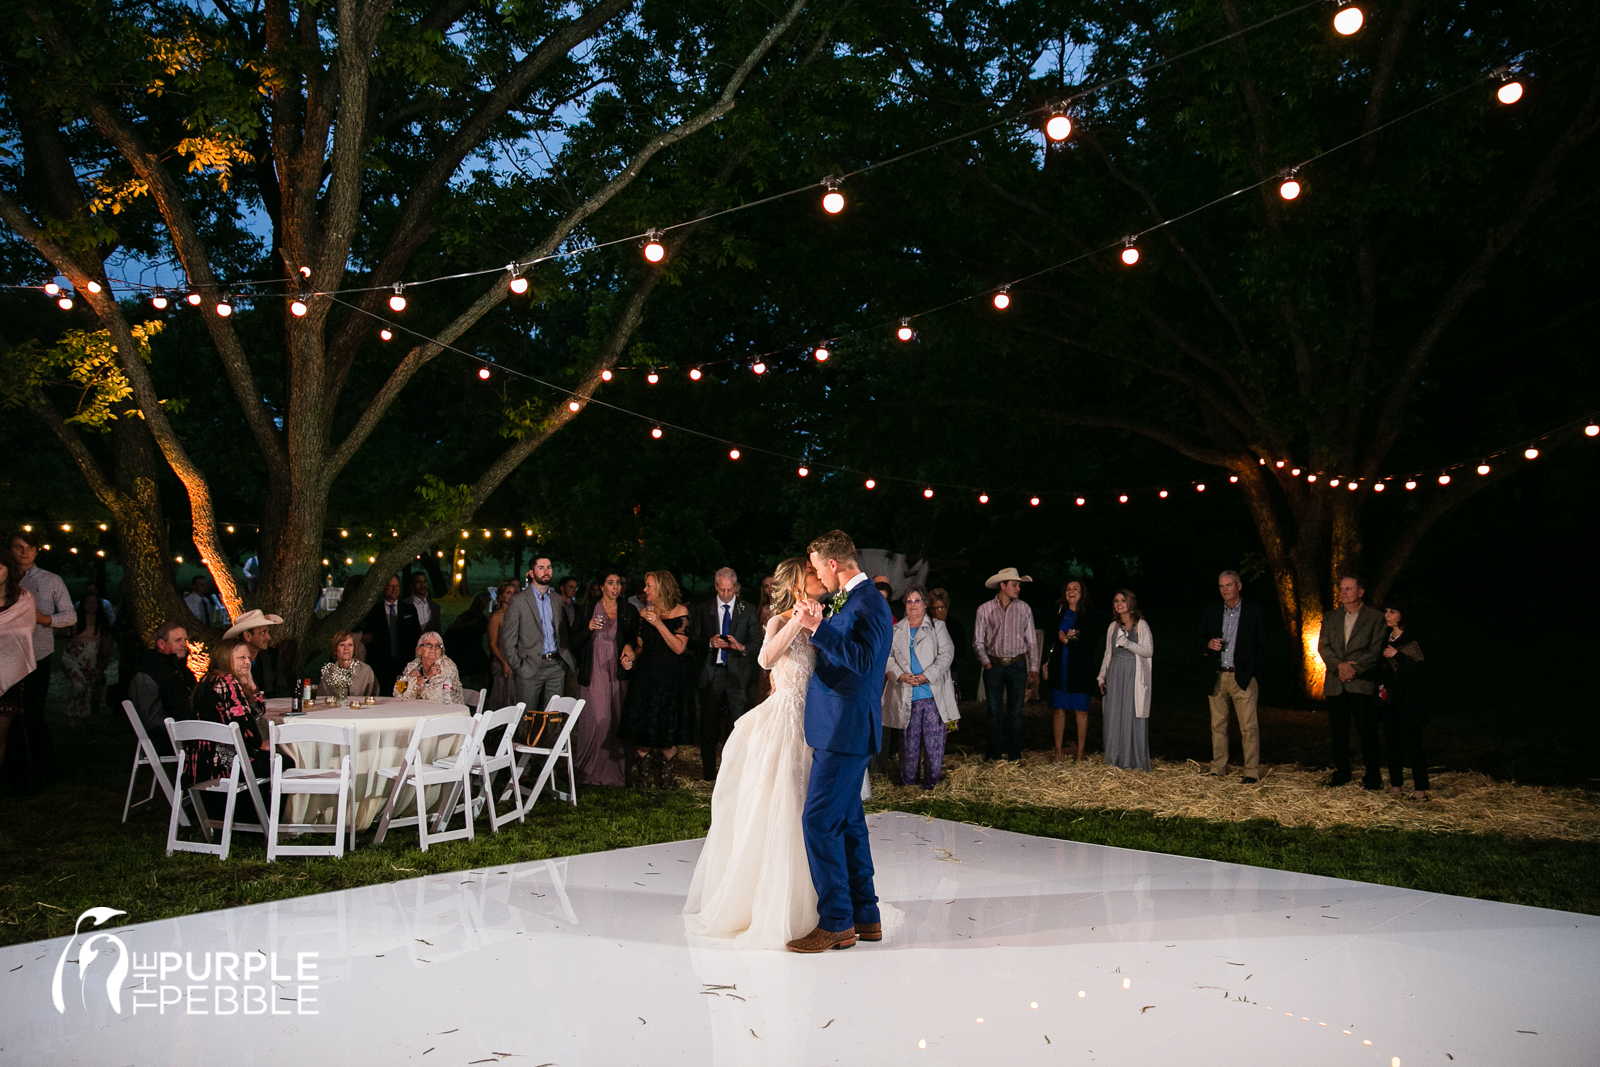 Reception Under the Trees